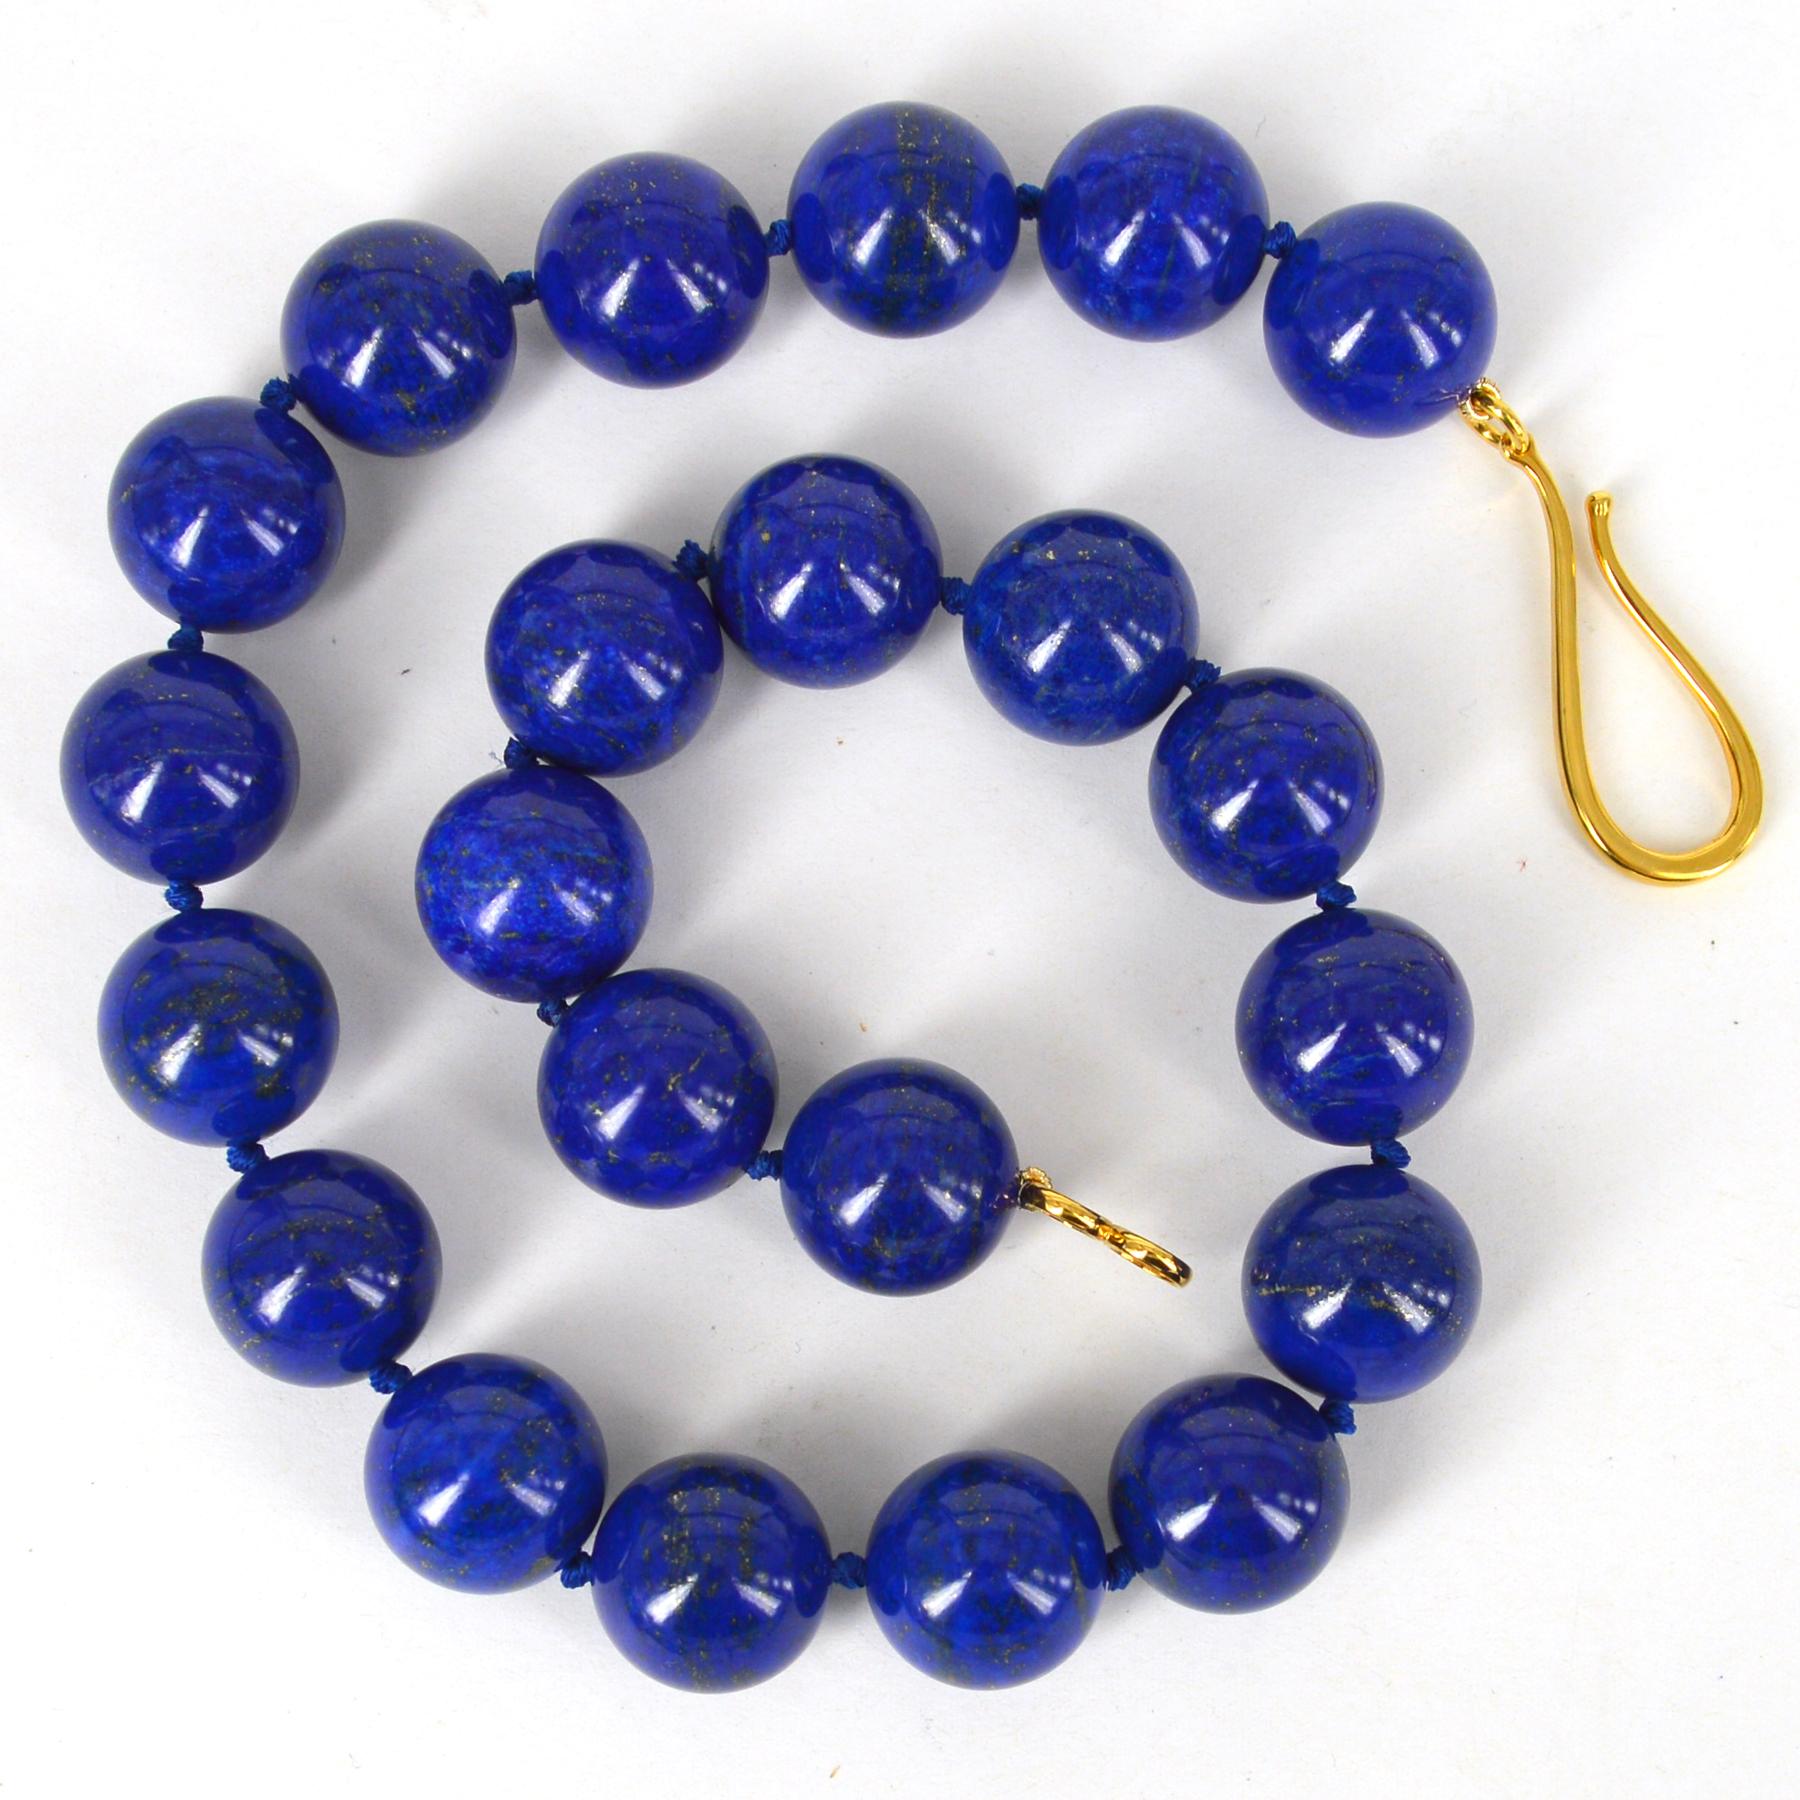 Large 18mm deep blue high quality Lapis Lazuli beads hand knotted on matching thread with a 55mm Gold plate Sterling Silver hook clasp 
Total length of necklace 49cm.

